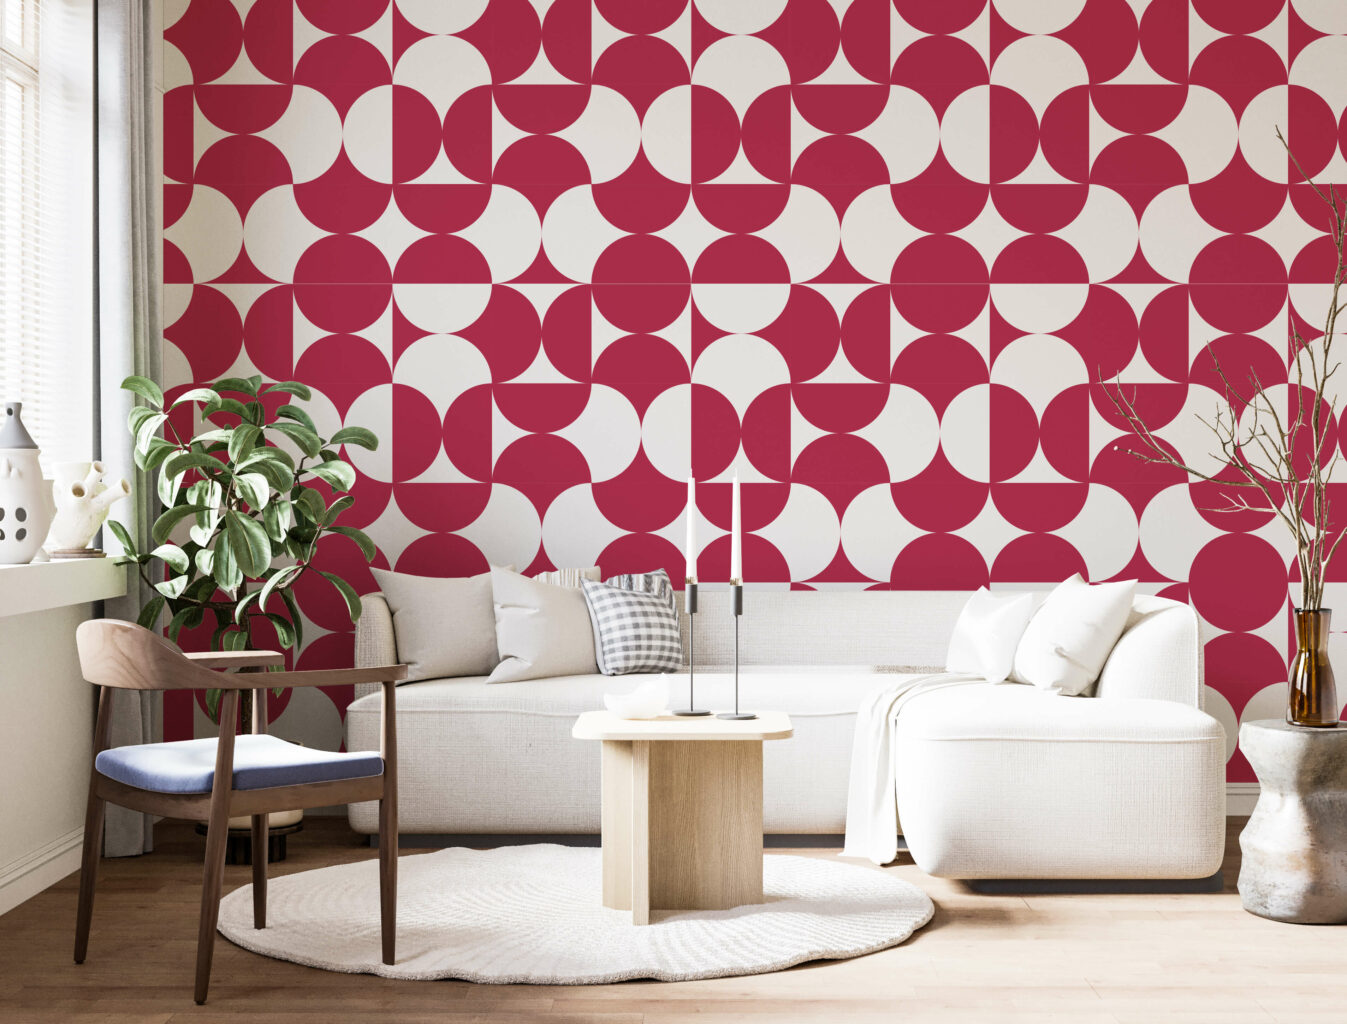 Patterned feature wall in Viva Magenta, Pantone's 2023 Colour of the Year.